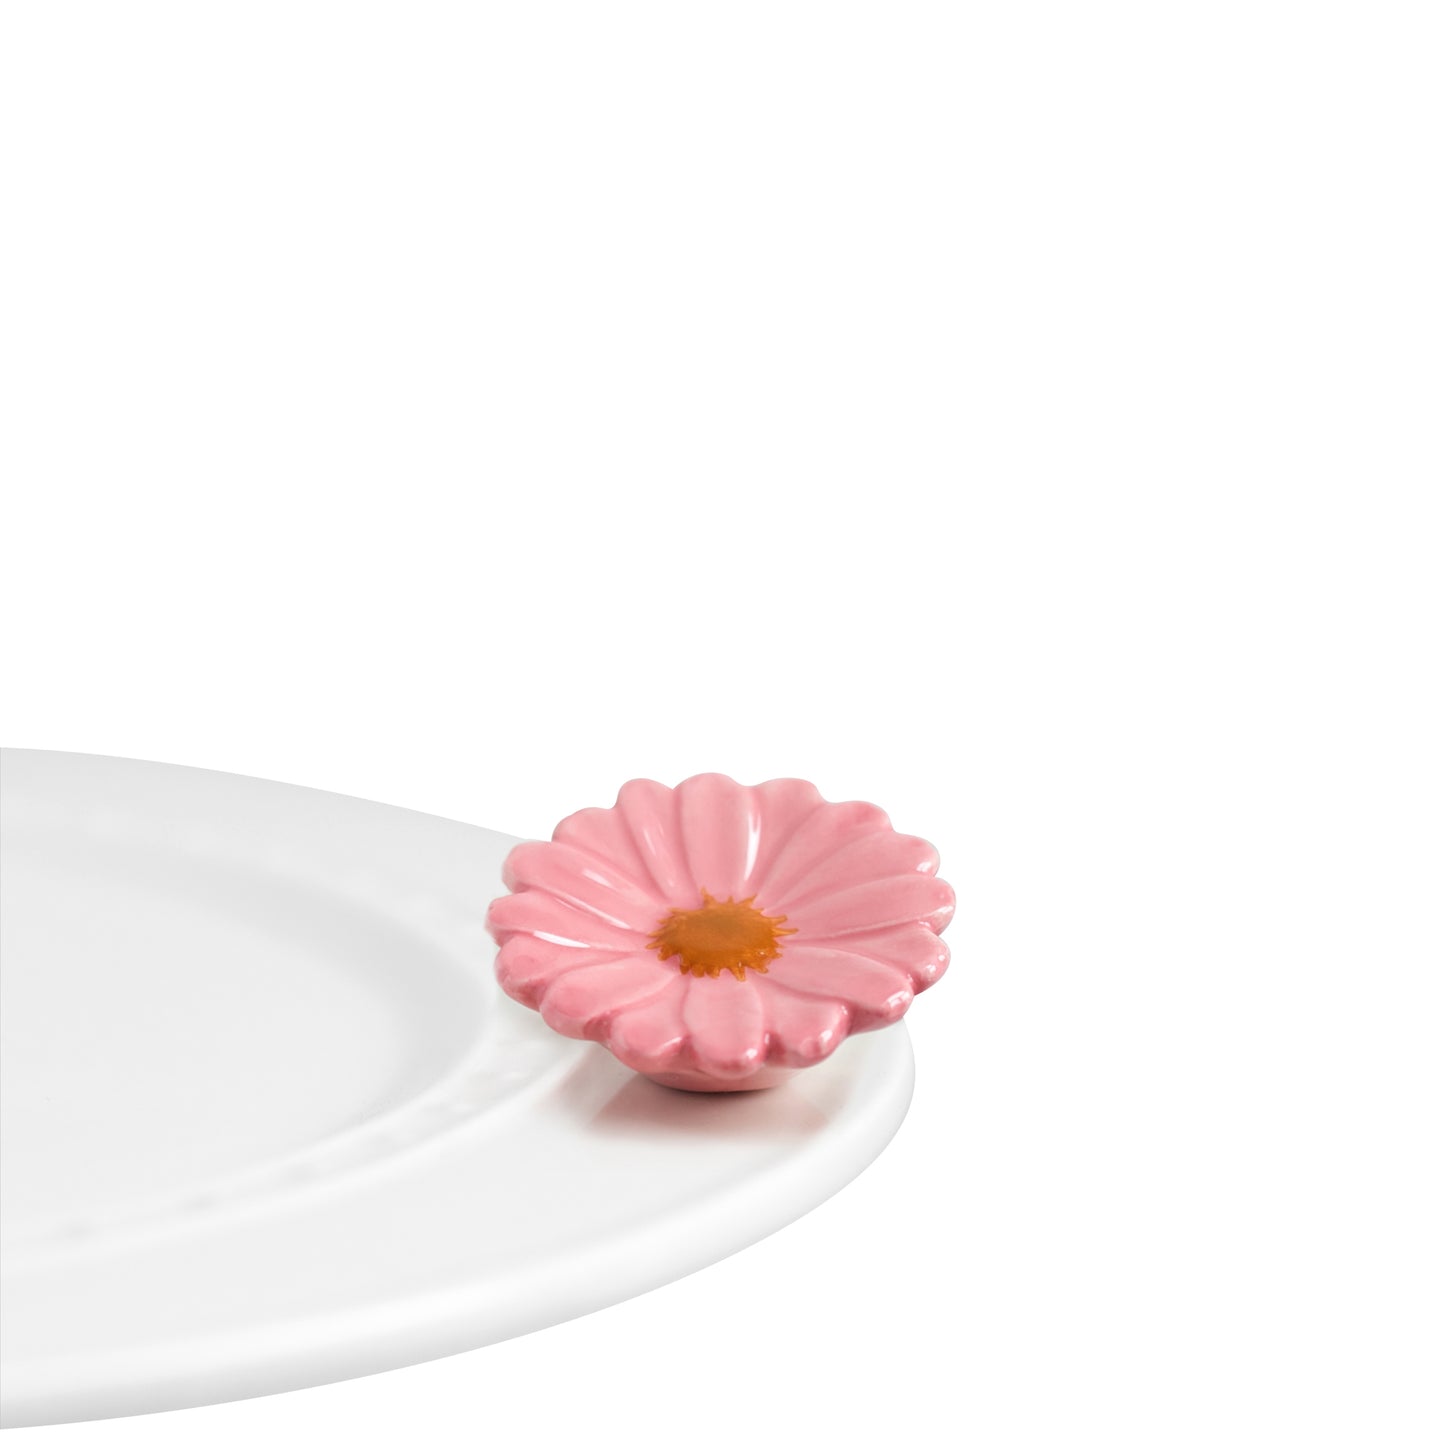 Nora Fleming Flower Power mini. Pink daisy perfect for Spring. Shop at The Painted Cottage in Edgewater, MD.